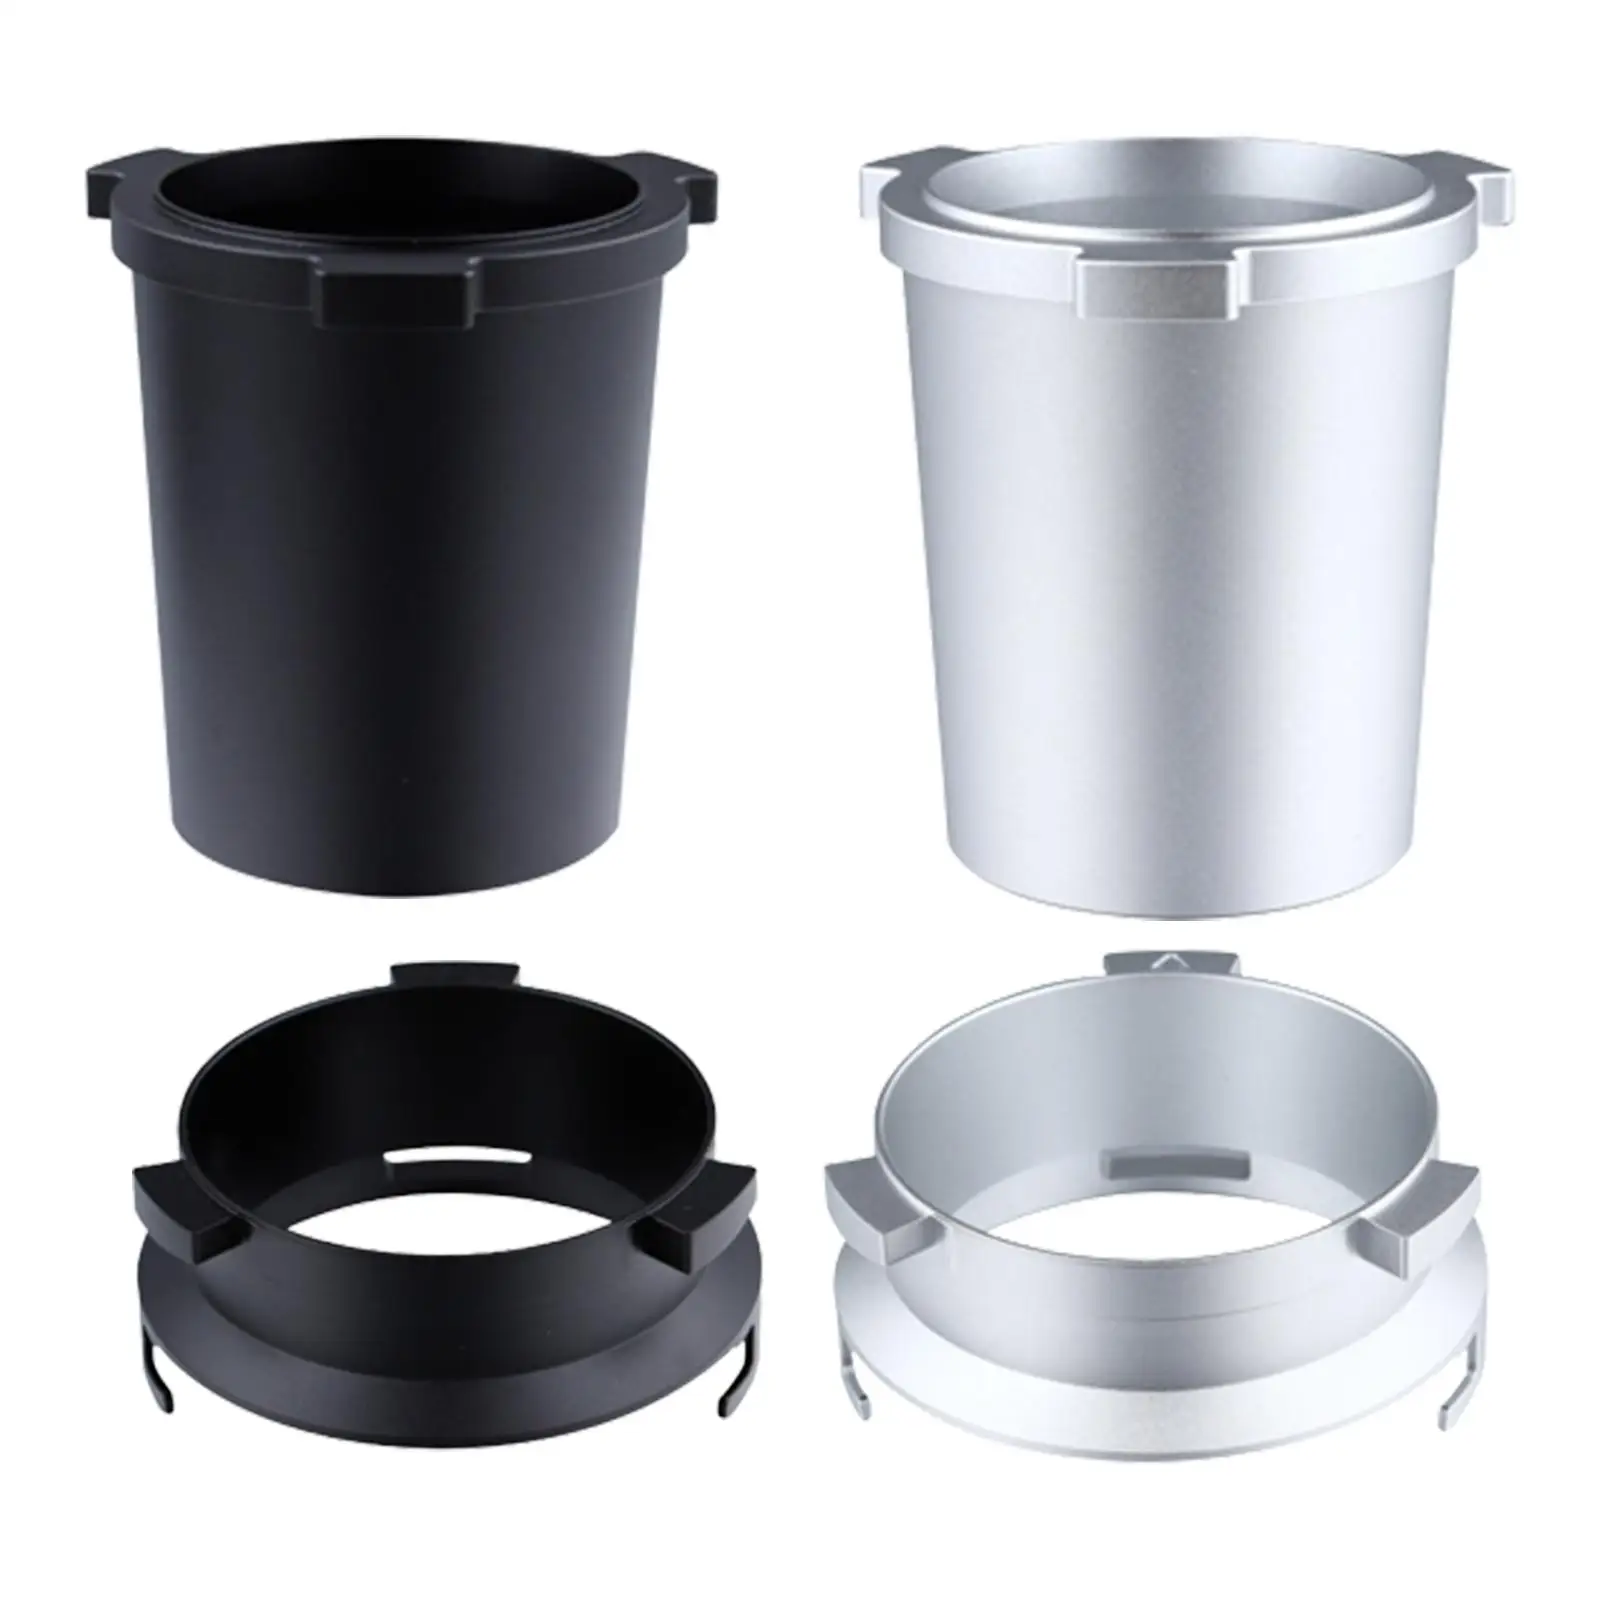 Portafilter Dosing Cup Coffee Machine Cup Kitchen Accessory 51mm Coffee Dosing Cup for Household